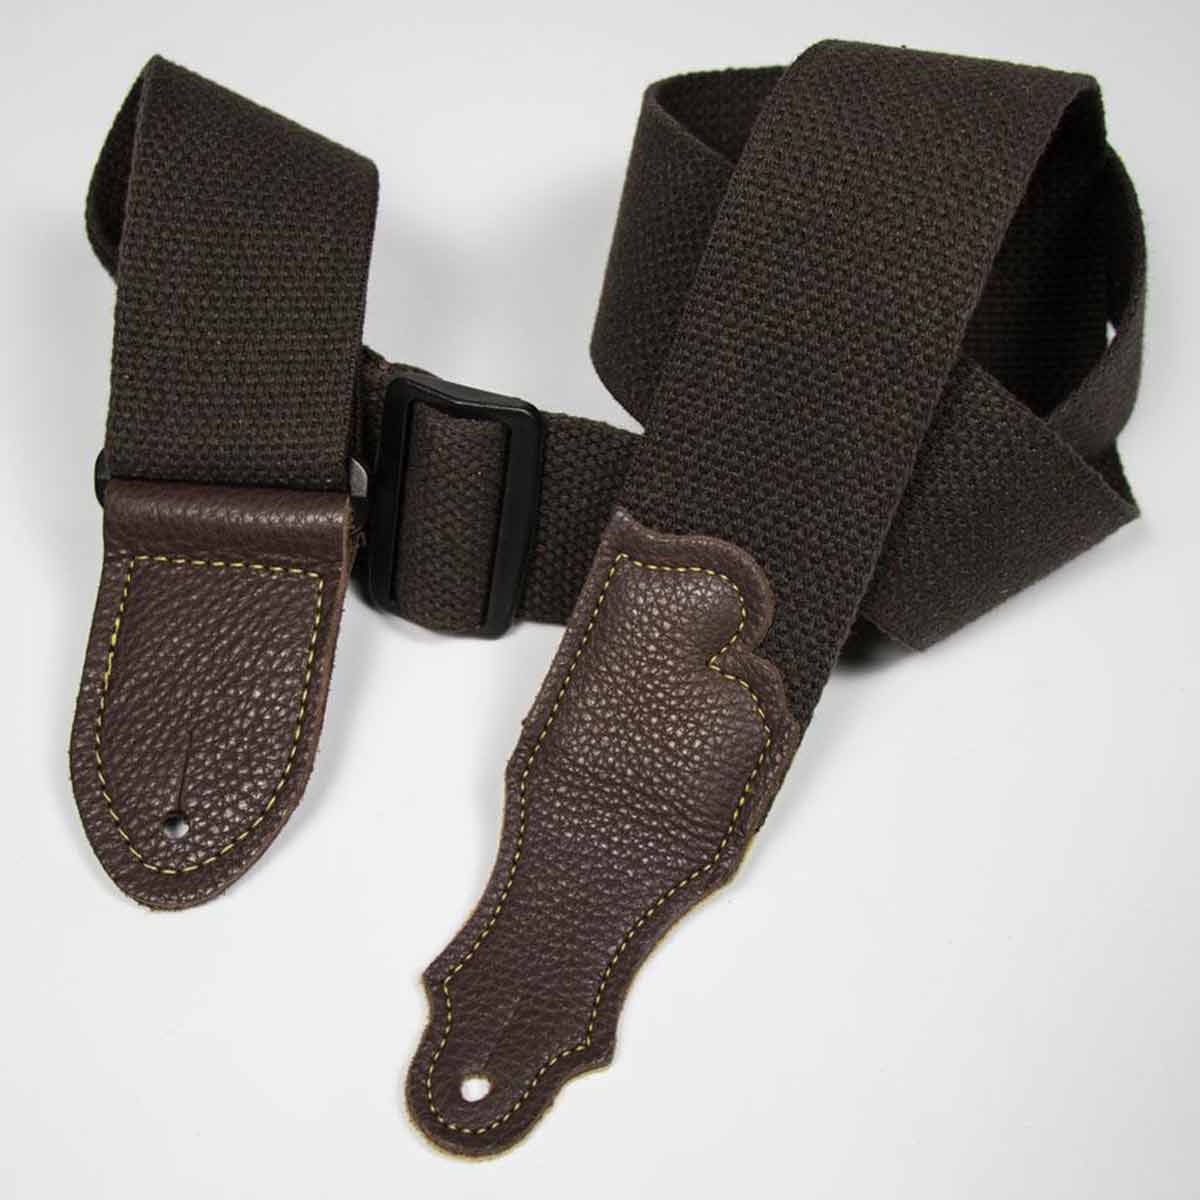 Franklin 2" Cotton Guitar Strap with Glove Leather End Tabs-Chocolate/Chocolate-Andy's Music